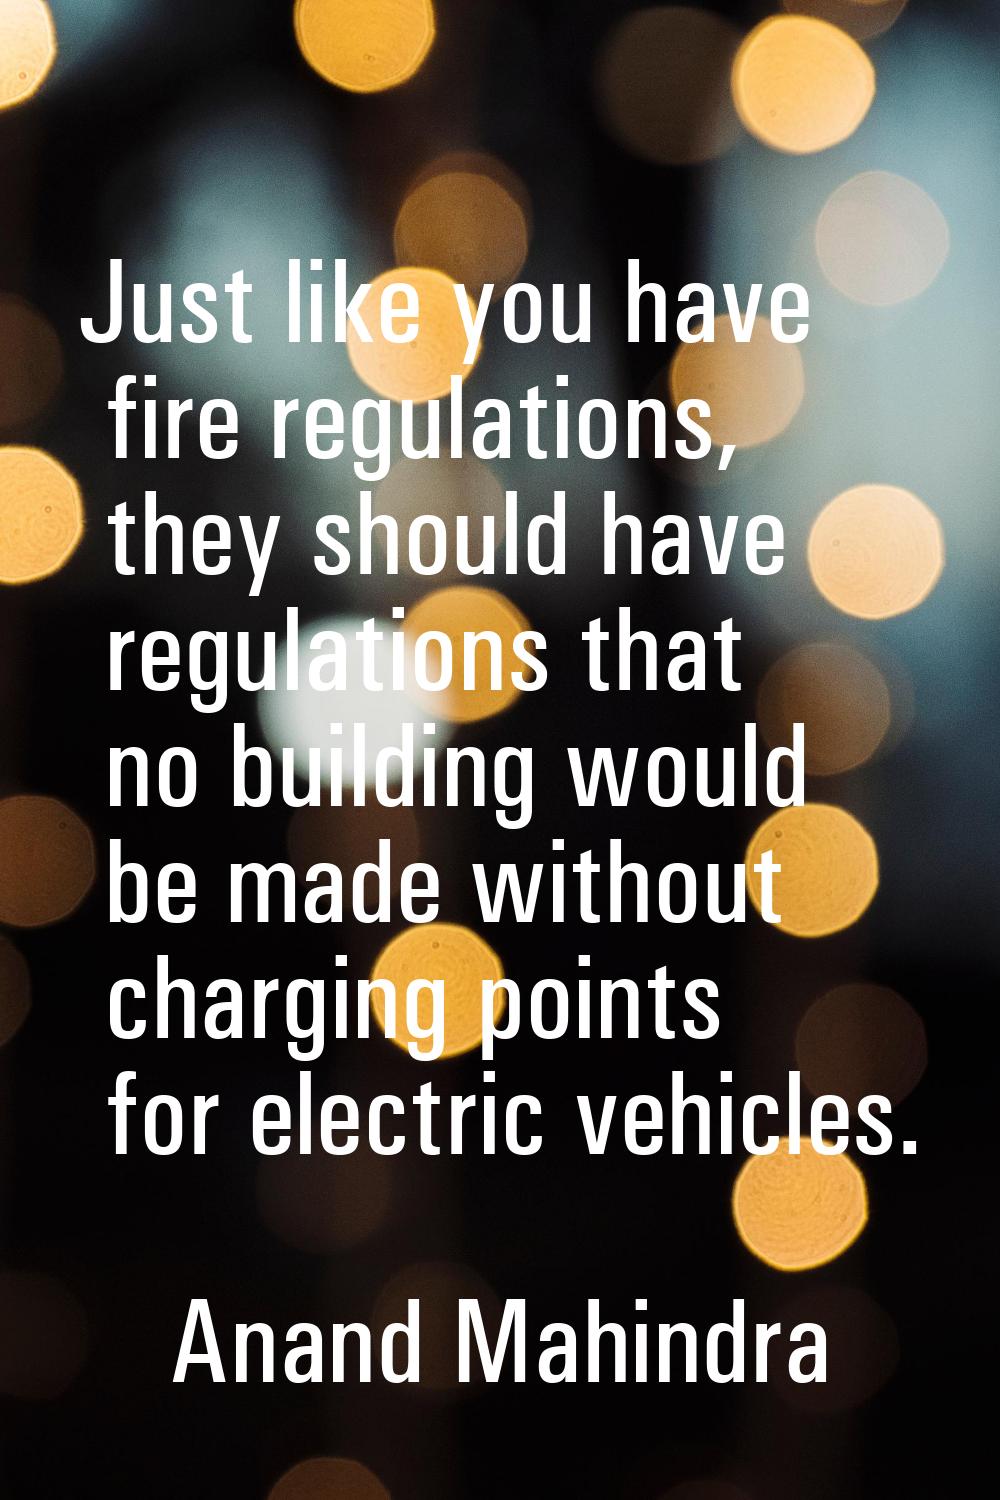 Just like you have fire regulations, they should have regulations that no building would be made wi